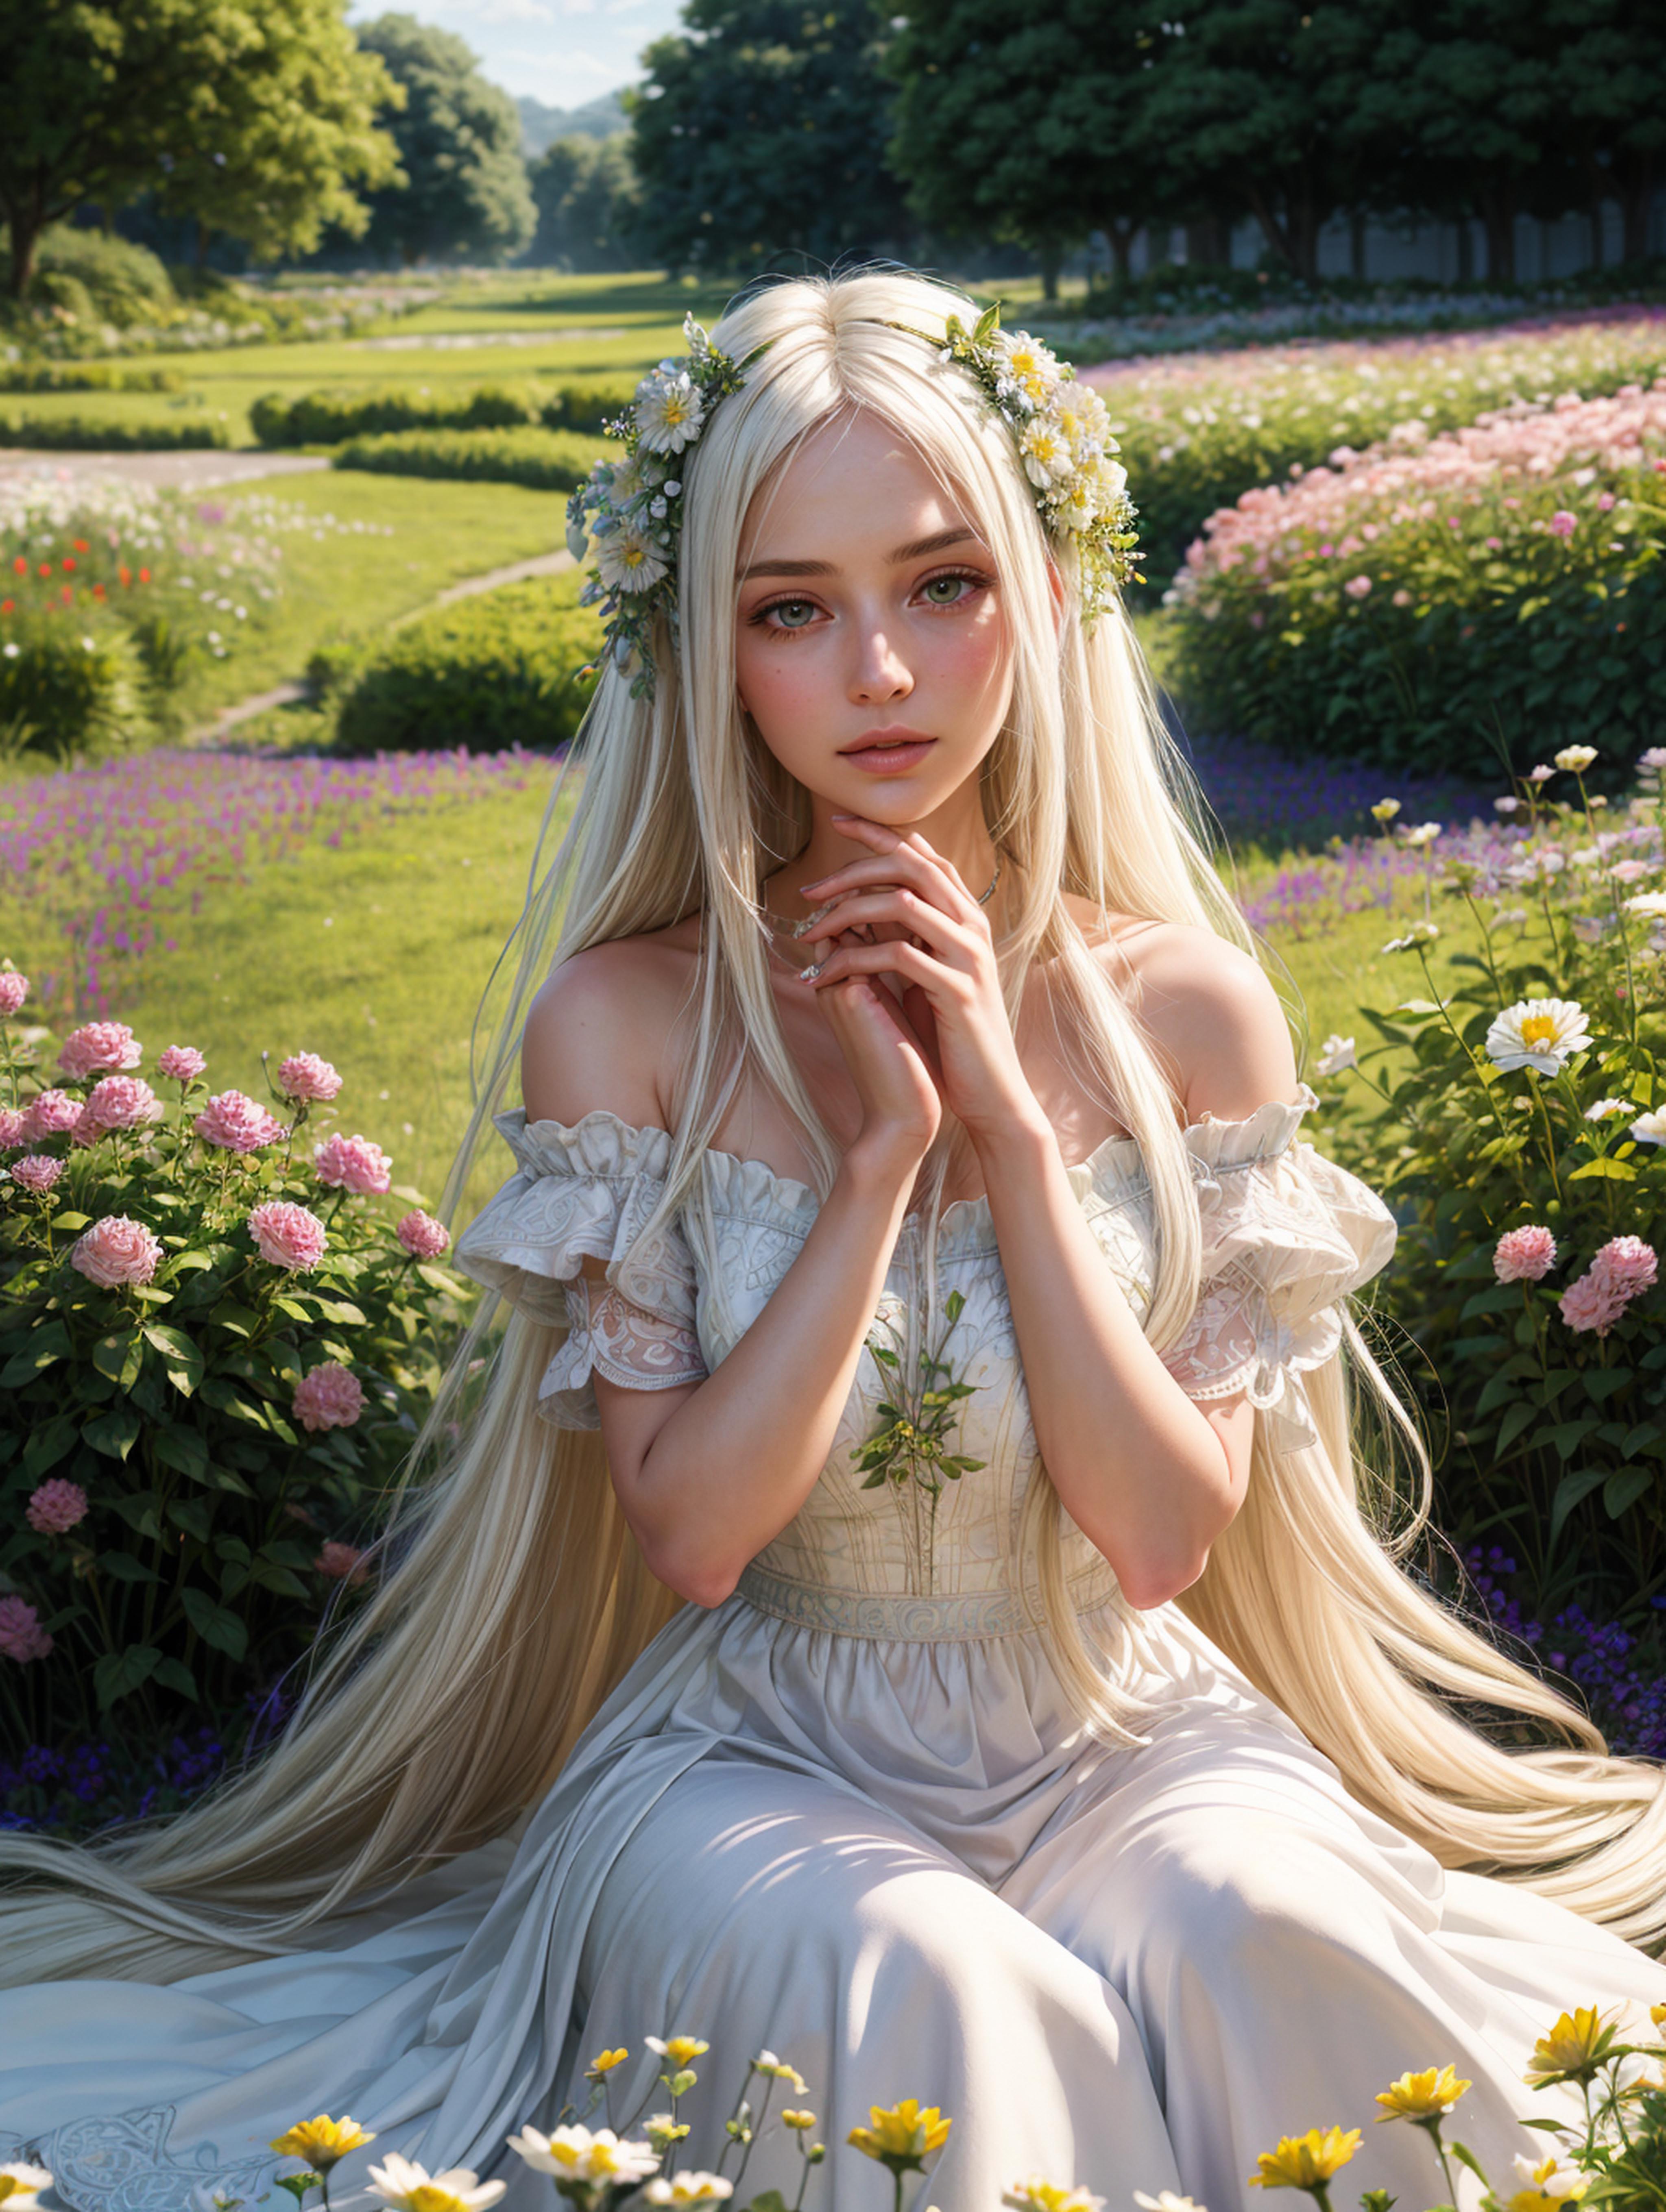 A blonde woman with flowers in her hair sitting in a field.